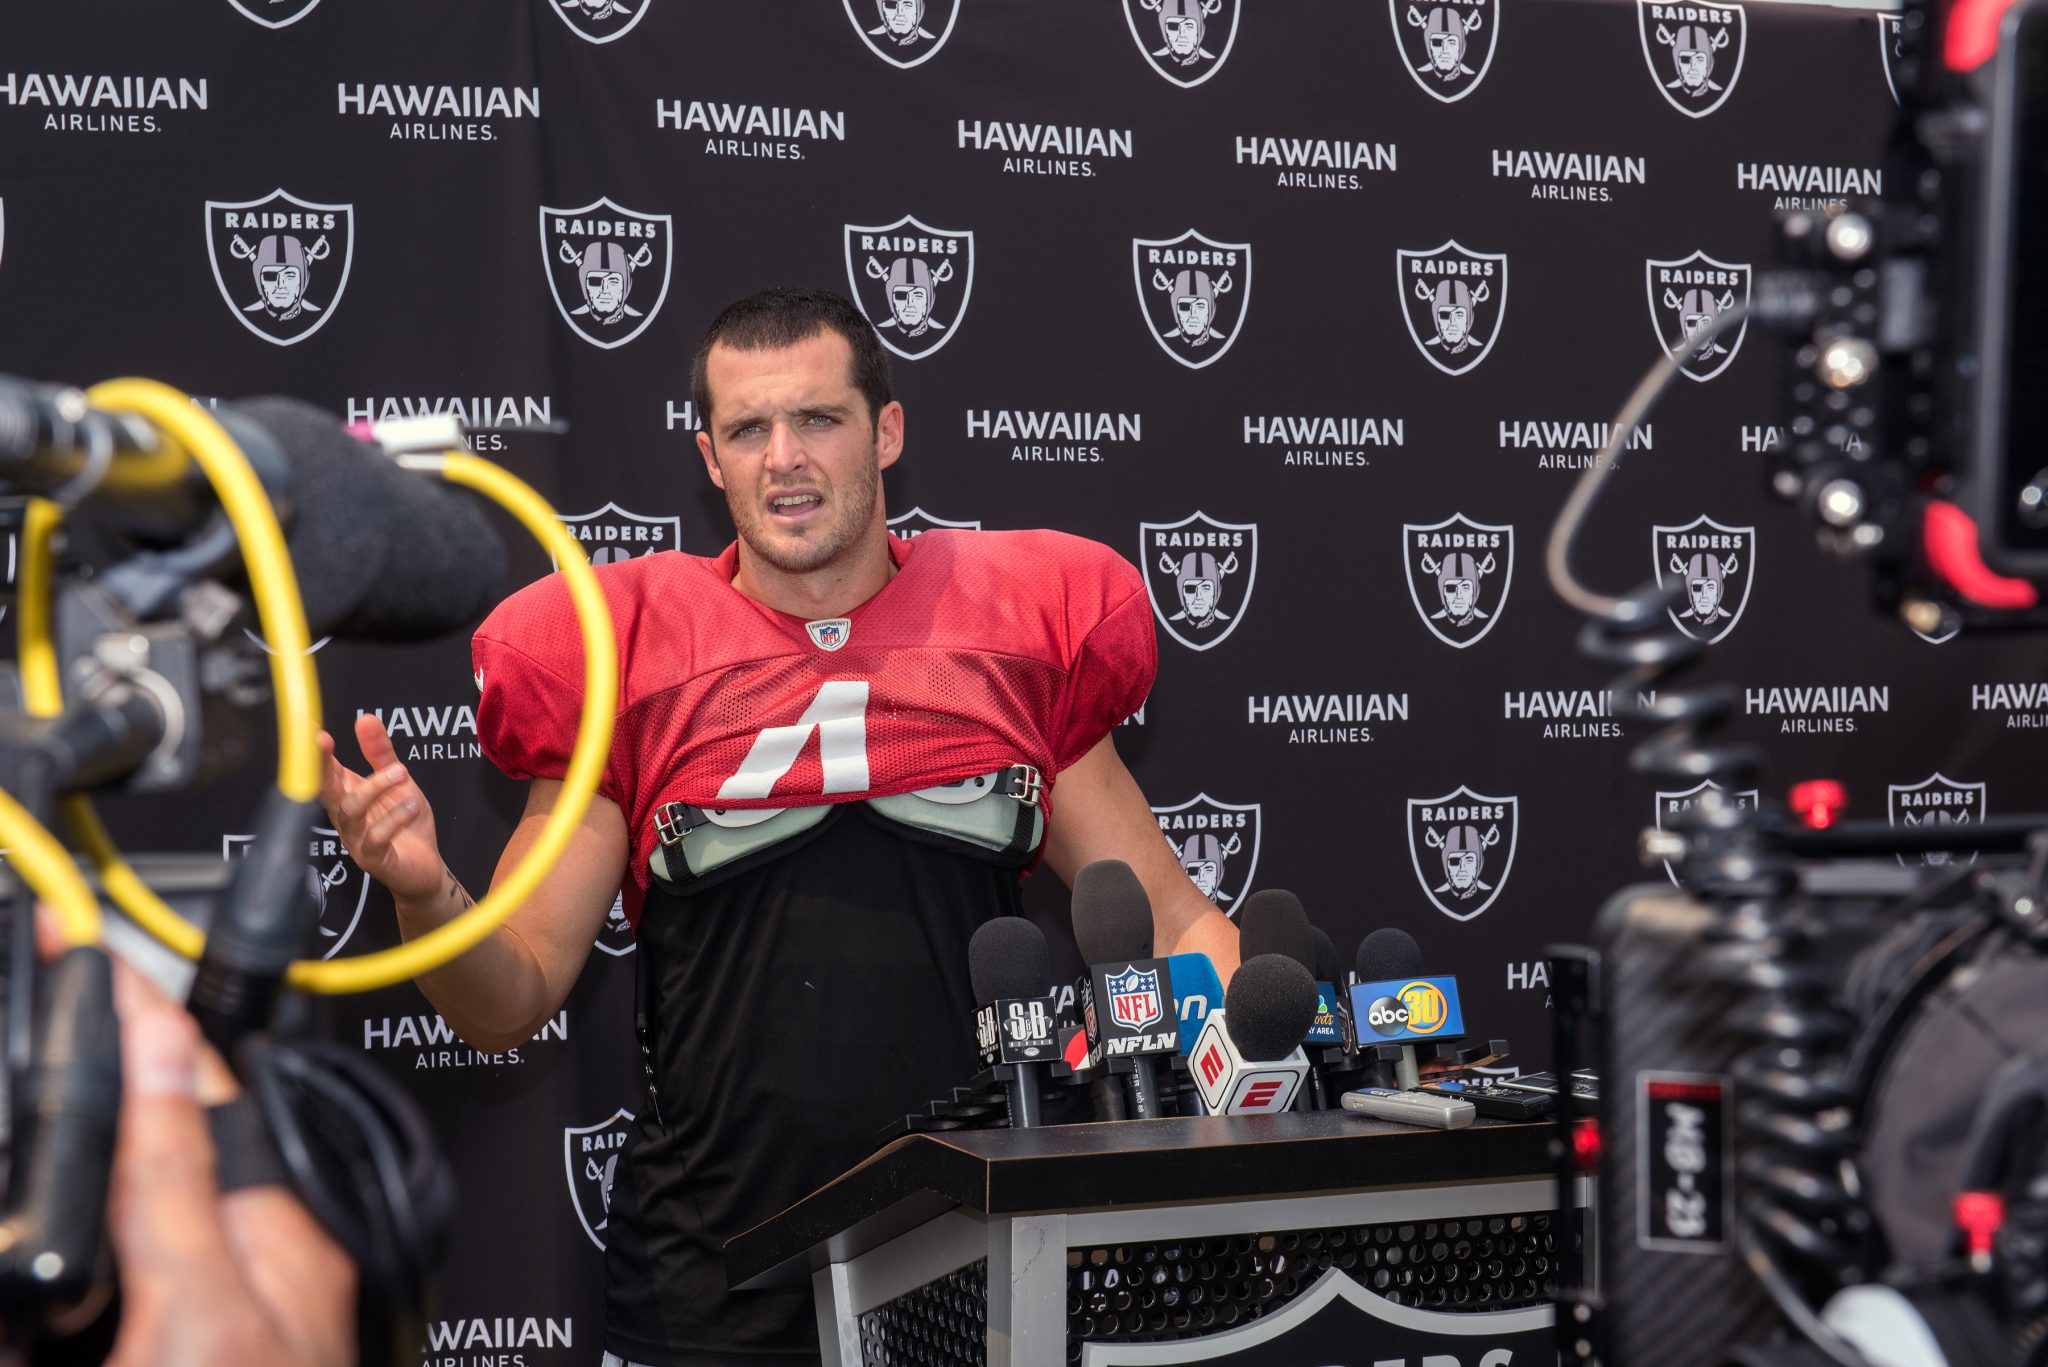 Oakland Raiders Quarterback Derek Carr speaks with the media after his practice in Napa Valley, Calif., August 7, 2018. U.S. Air Force photo by Louis Briscese via Creative Commons License.